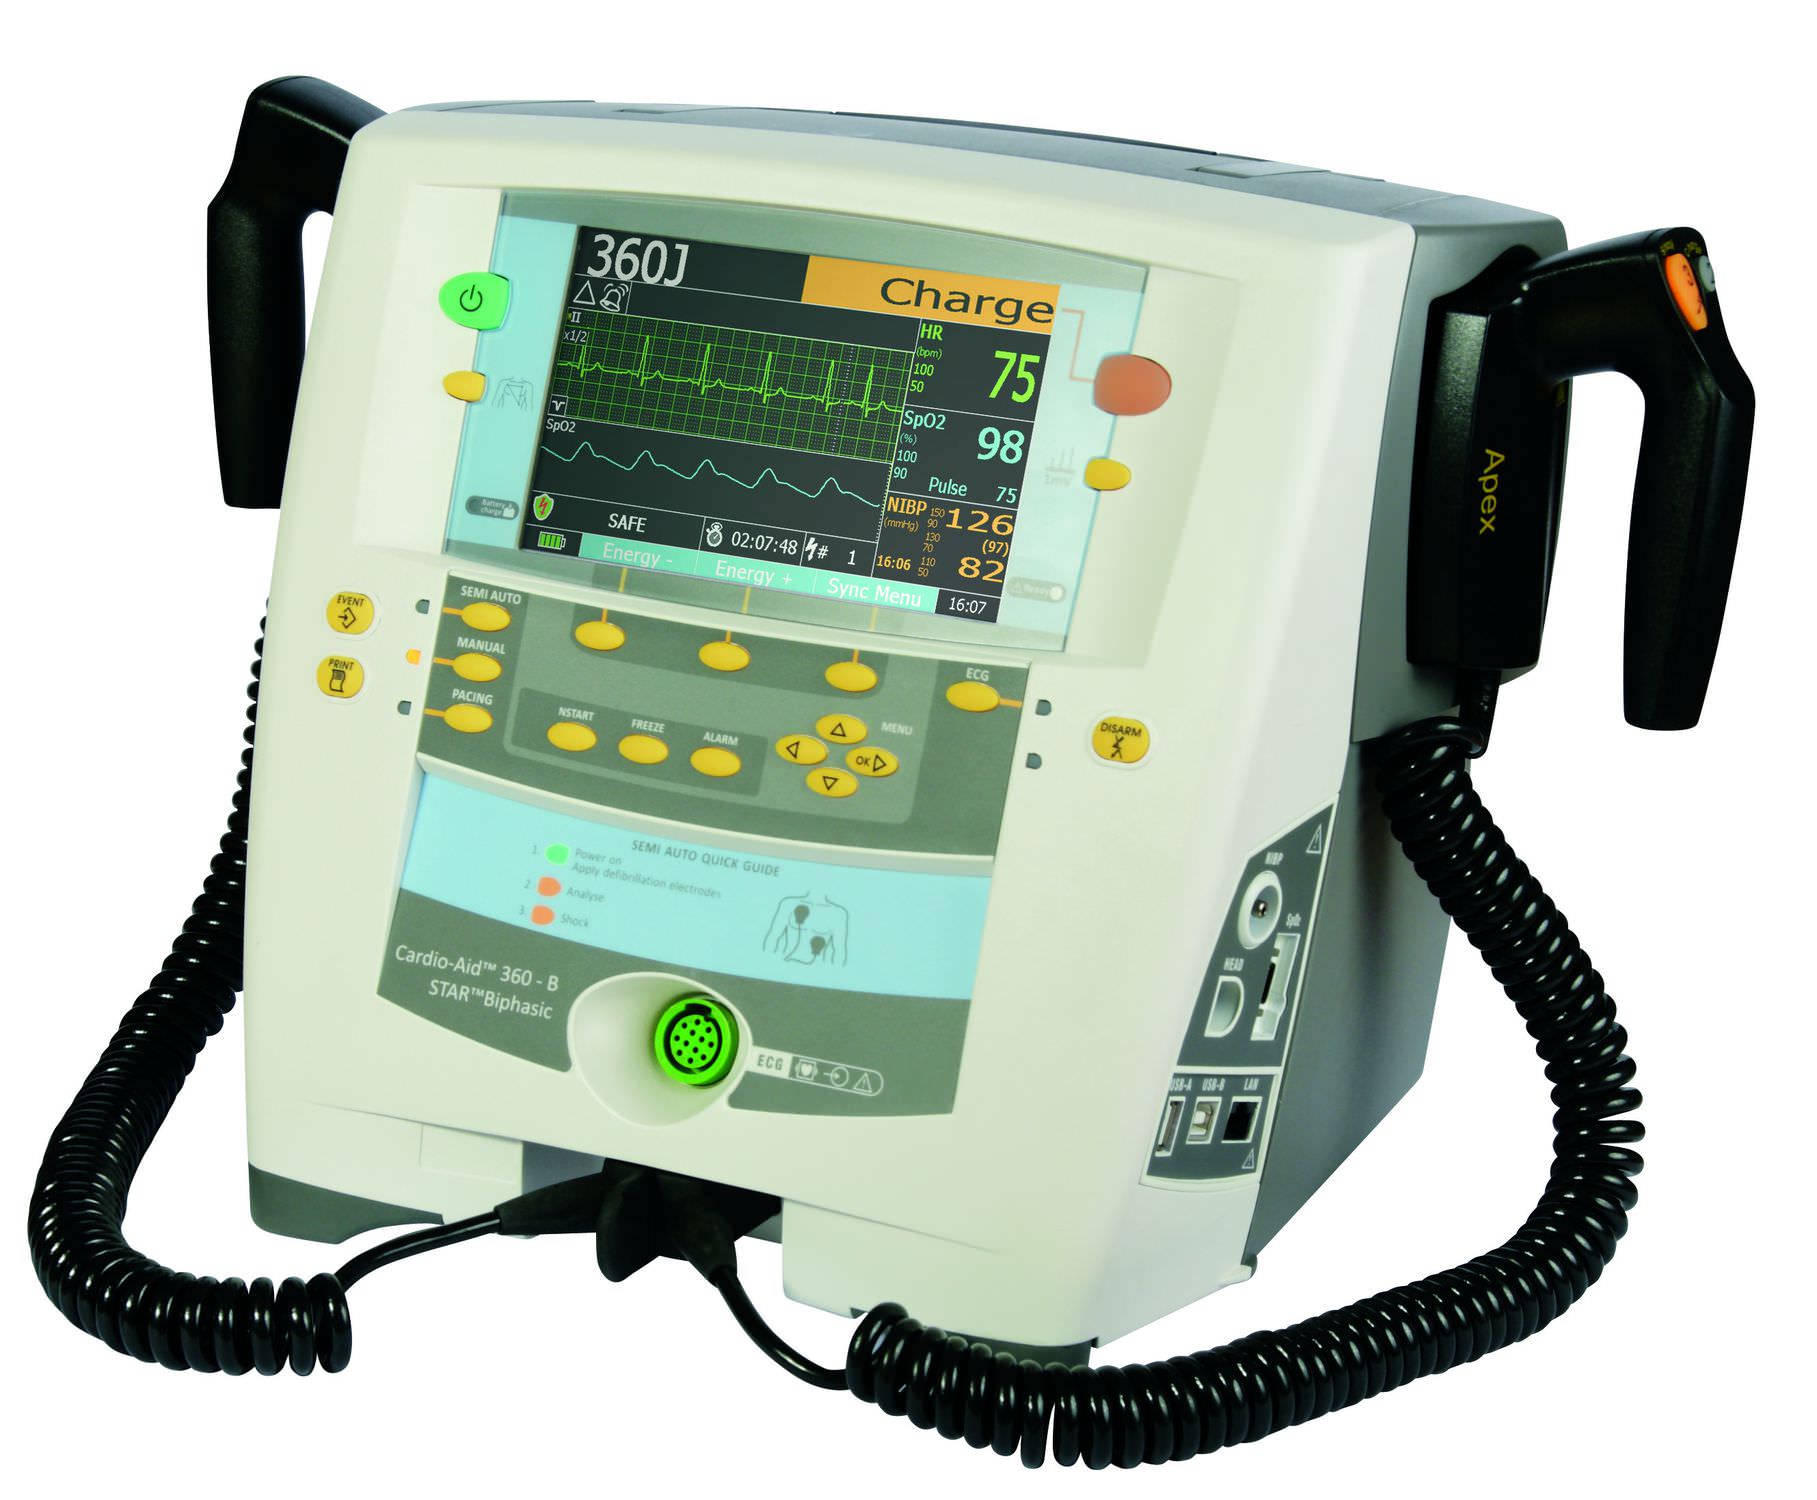 Semi-automatic external defibrillator / compact multi-parameter monitor Cardio-Aid™ 360B Innomed Medical Developing and Manufacturing